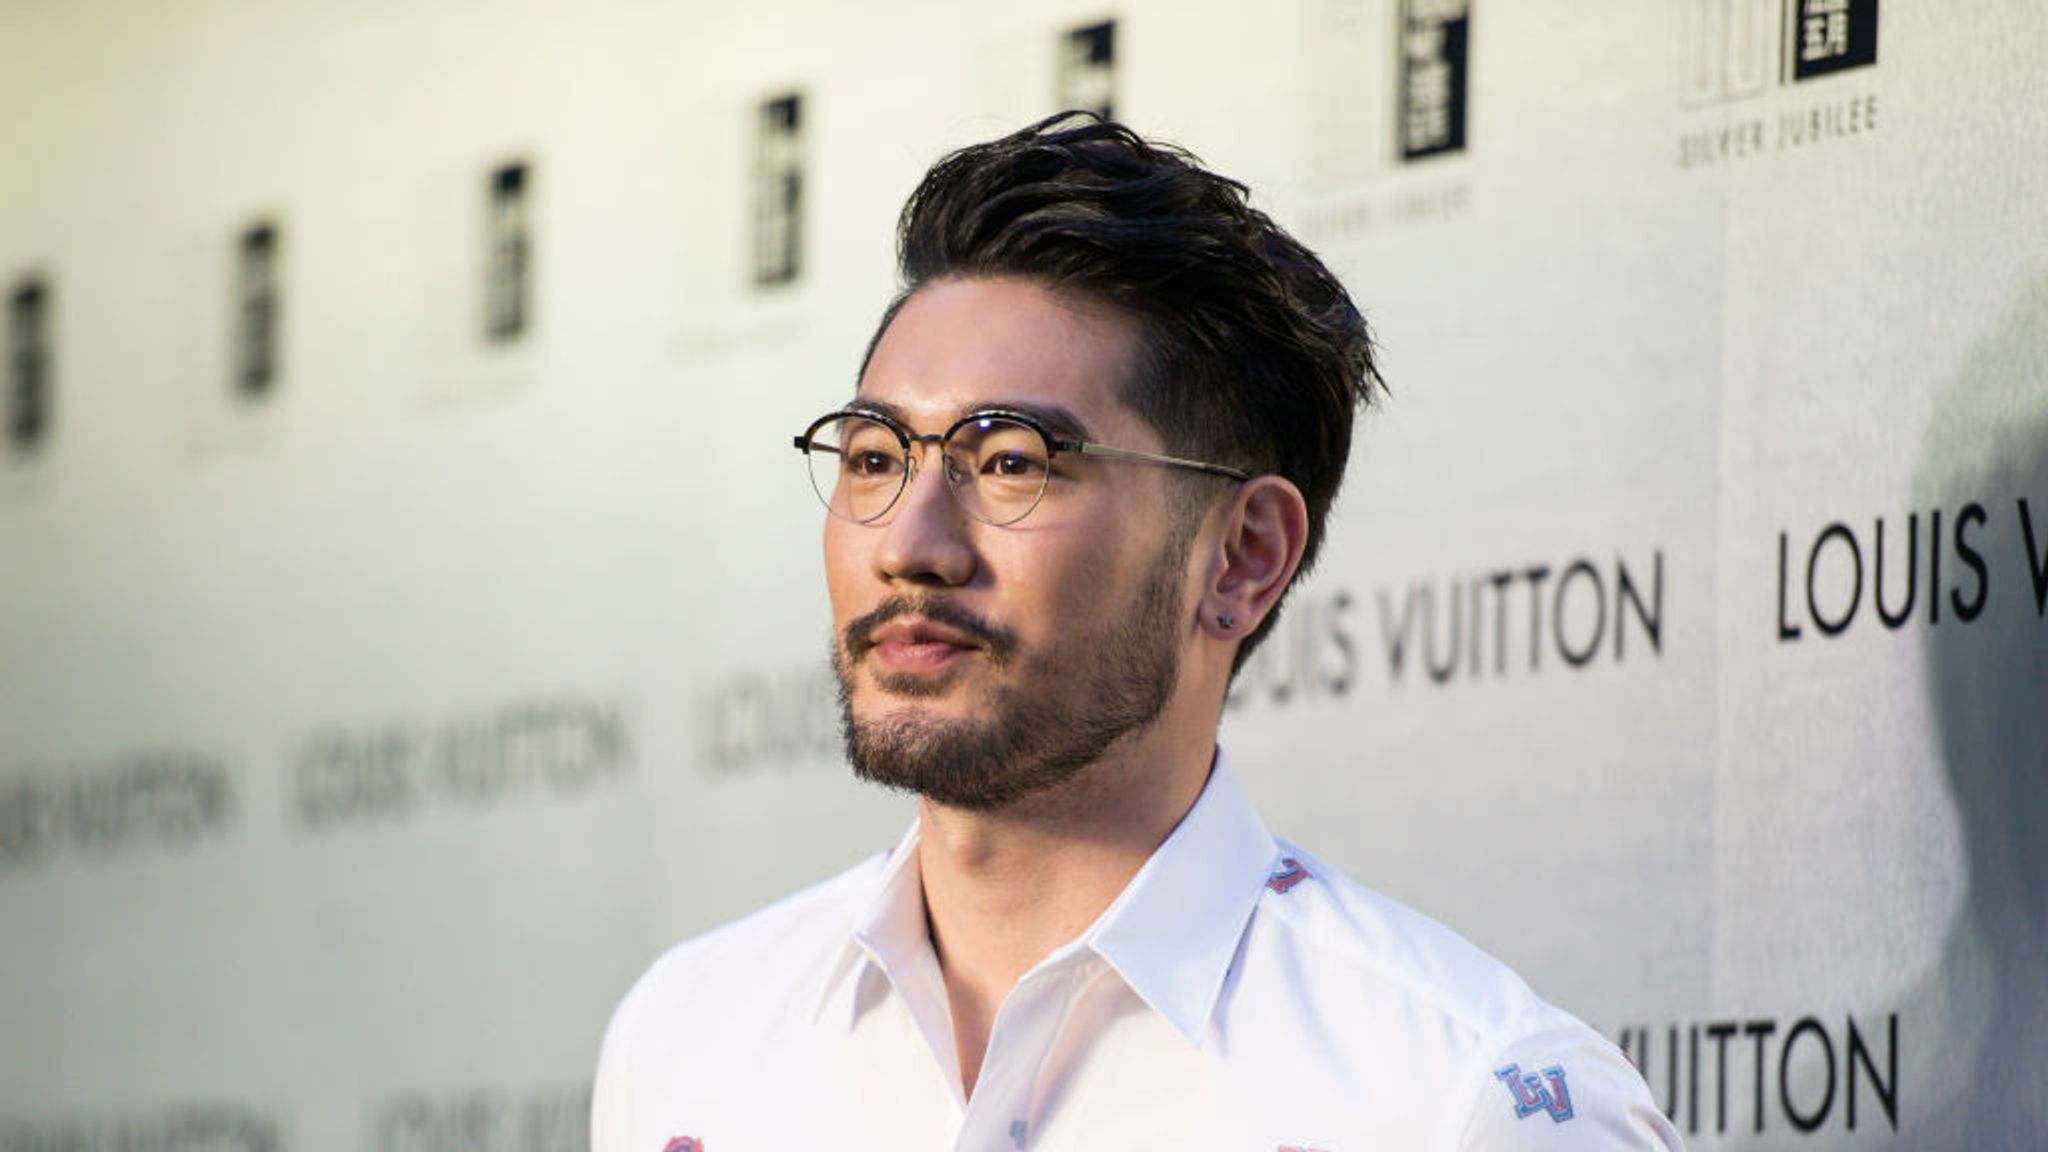 Godfrey Gao: Actor, dies after collapsing while filming reality TV show in China